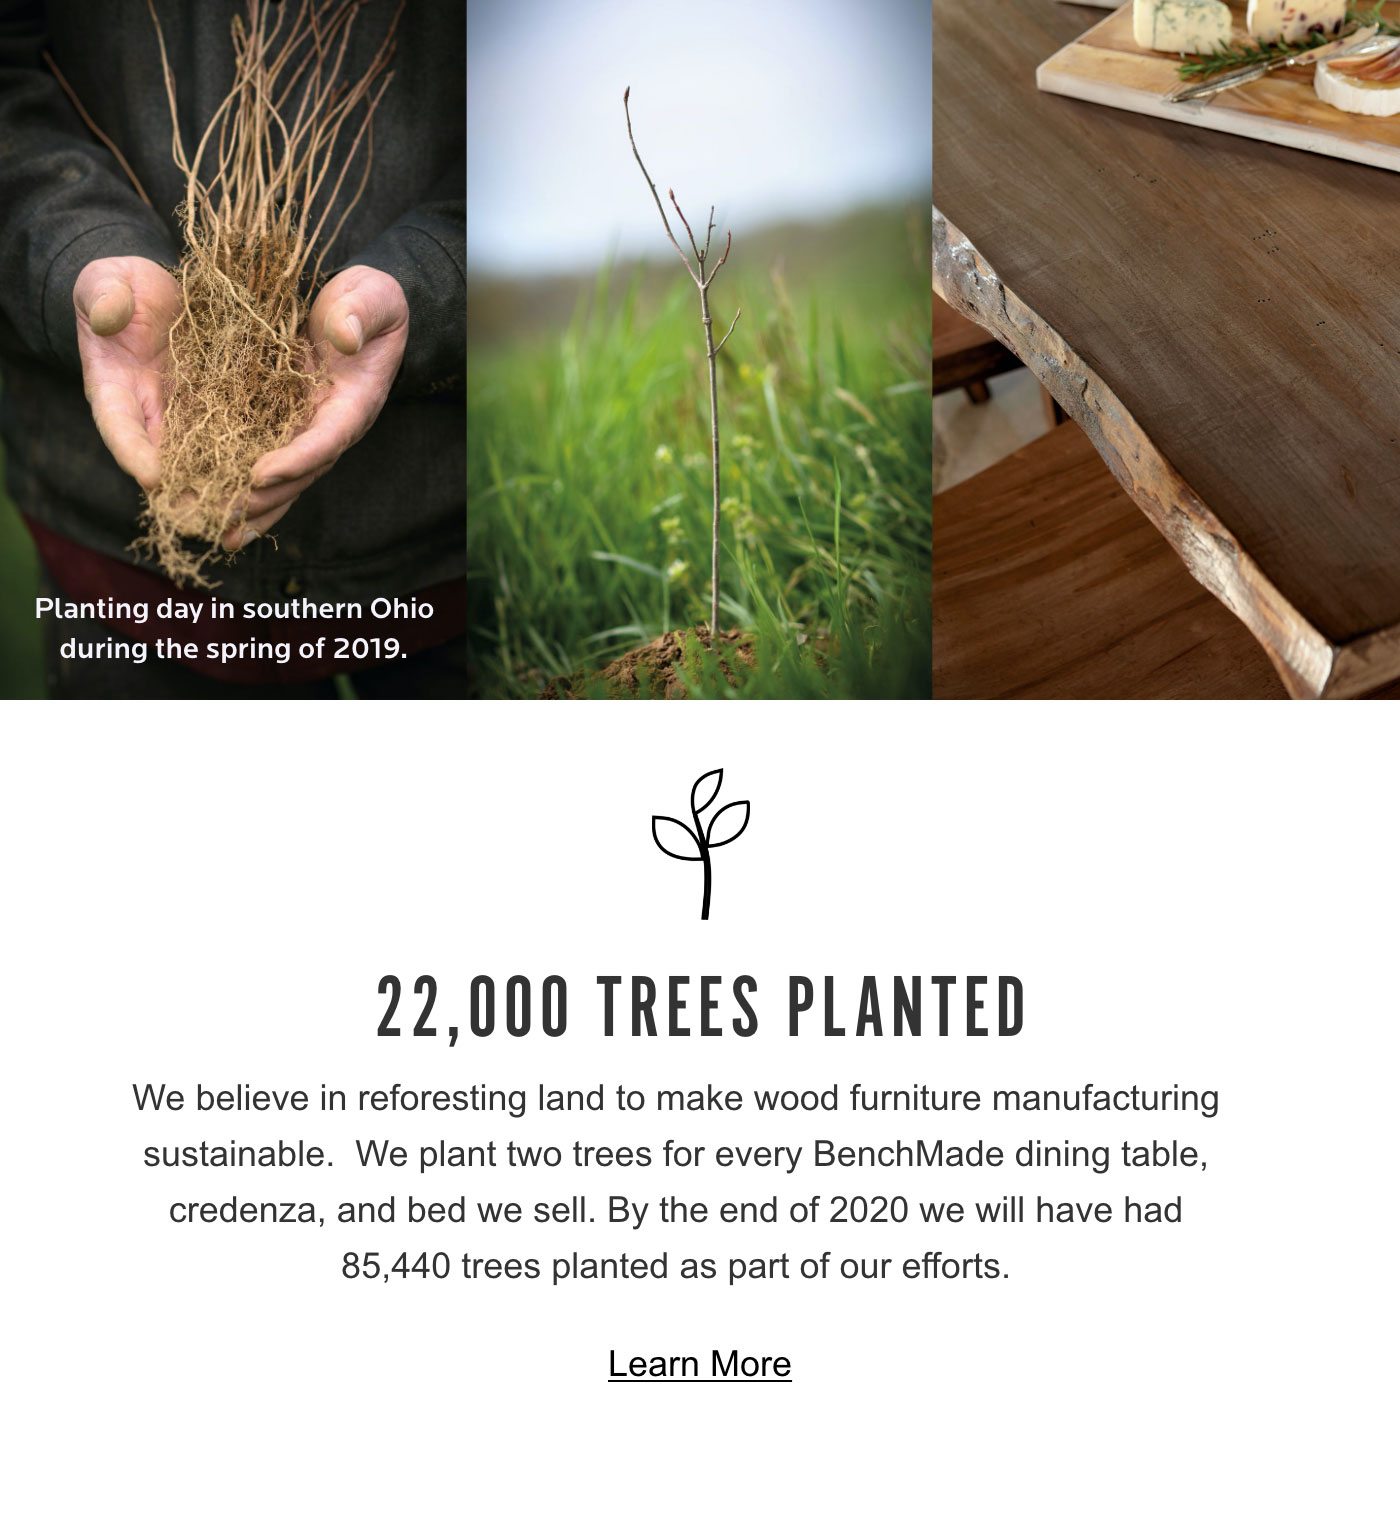 22,000 Trees Planted